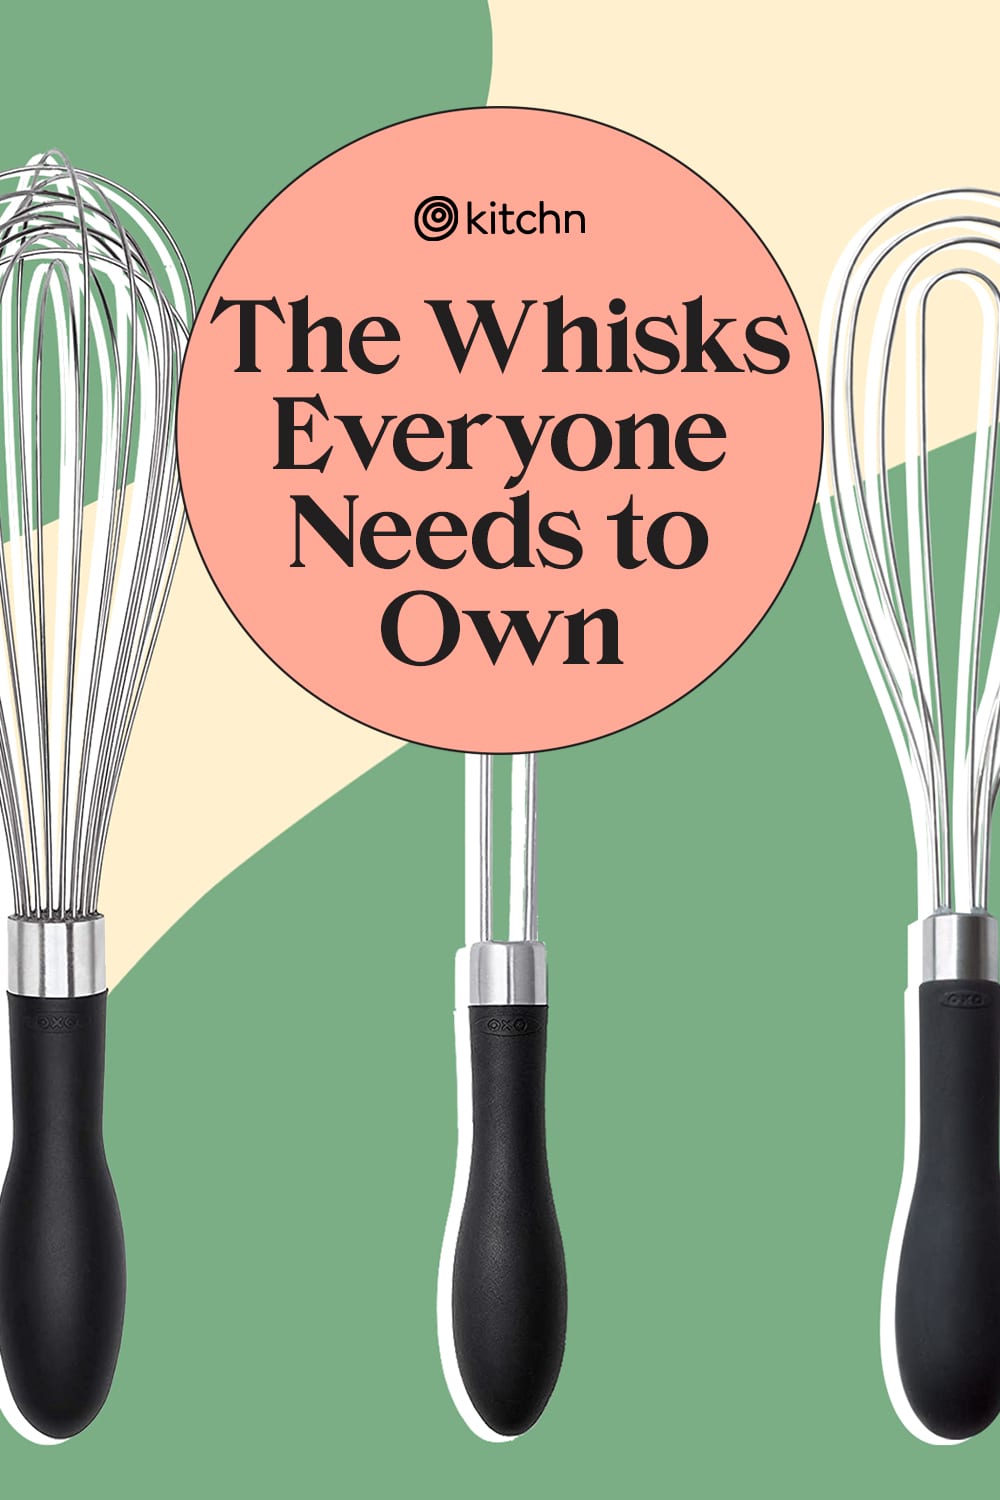 What Are the Different Types of Whisks Used For?